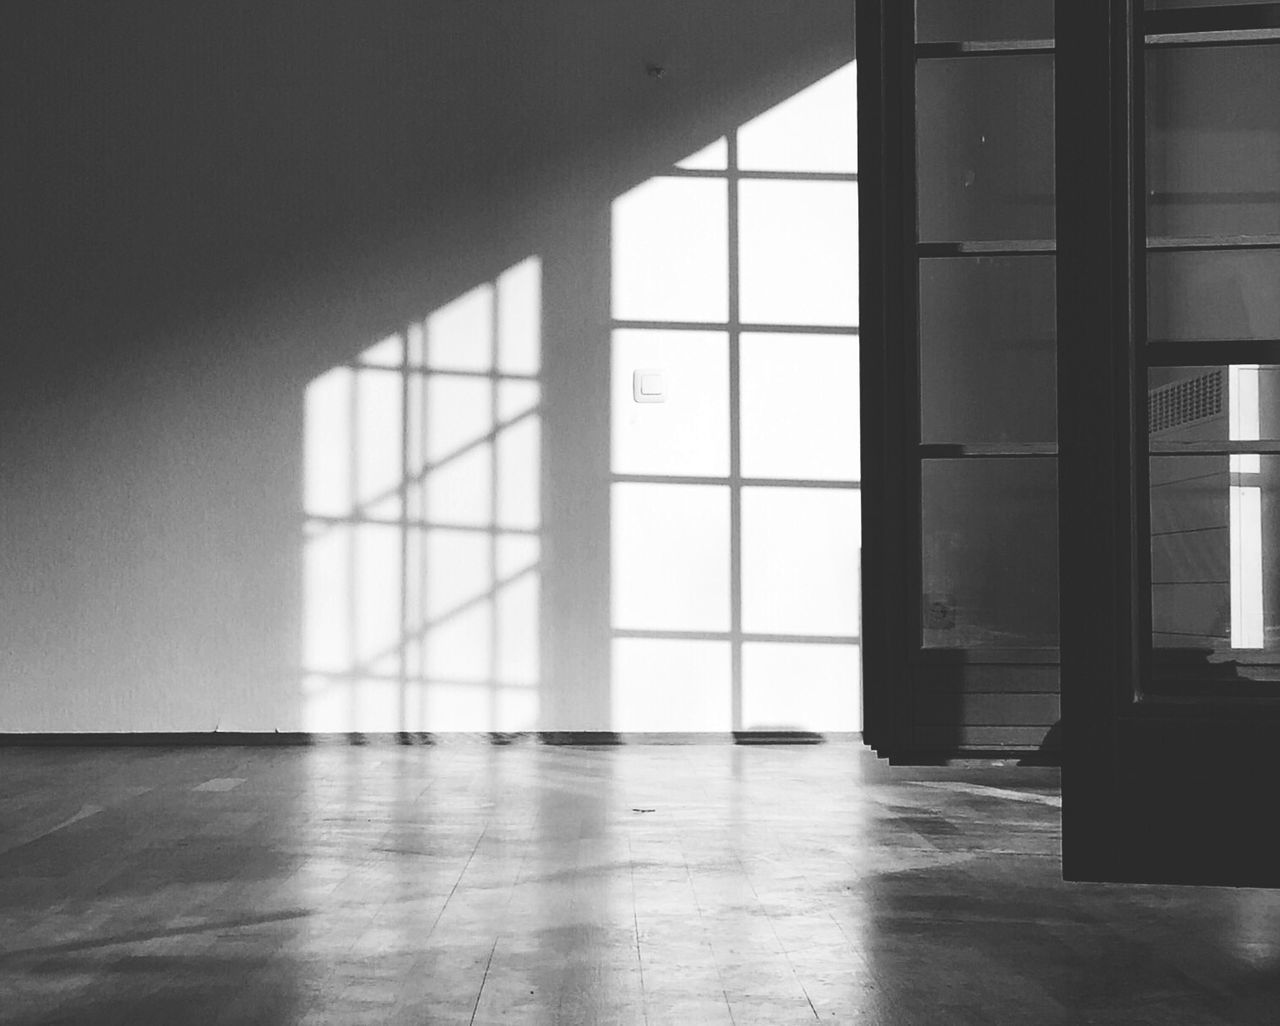 indoors, window, glass - material, flooring, architecture, built structure, transparent, home interior, empty, tiled floor, absence, interior, door, sunlight, corridor, day, no people, reflection, ceiling, glass